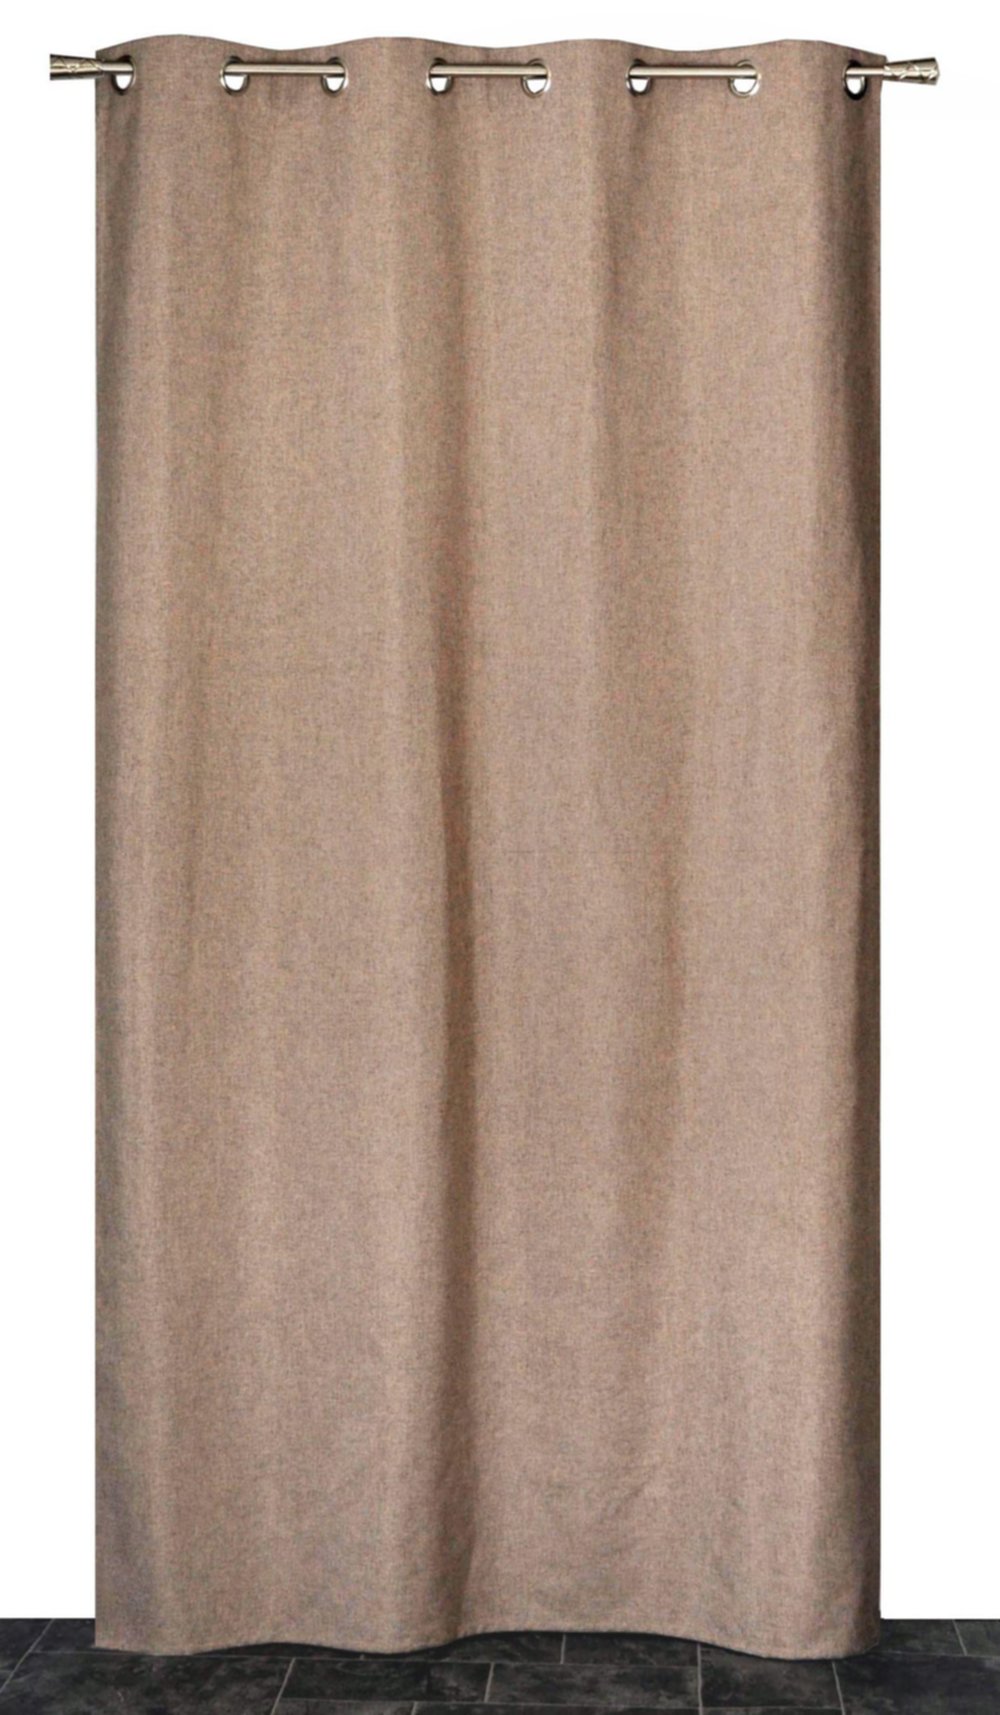 Rideau occultant chiné 140x240cm taupe - DYLREV